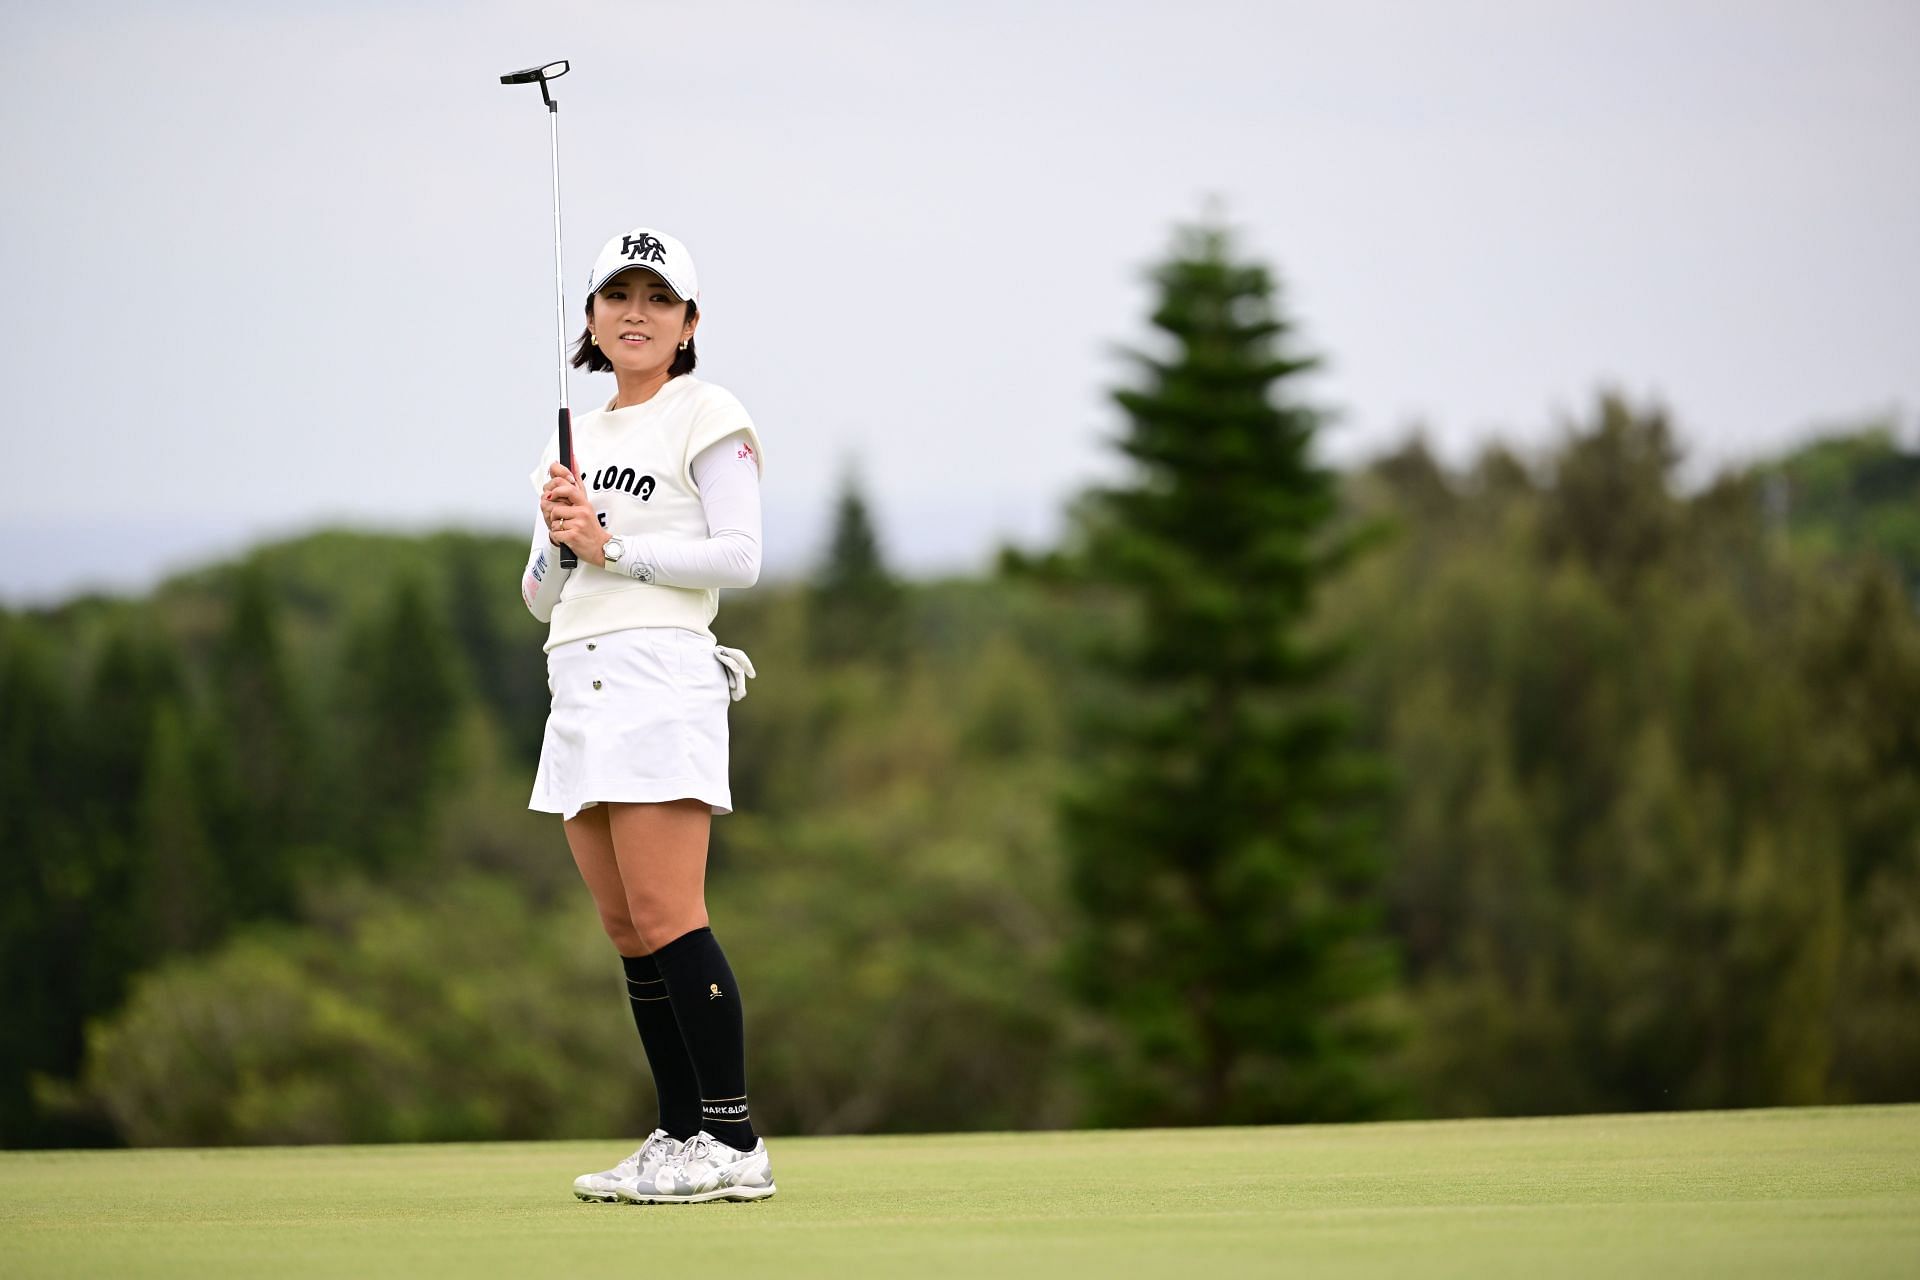 Daikin Orchid Ladies Tournament - Round Two (Photo by Atsushi Tomura/Getty Images)